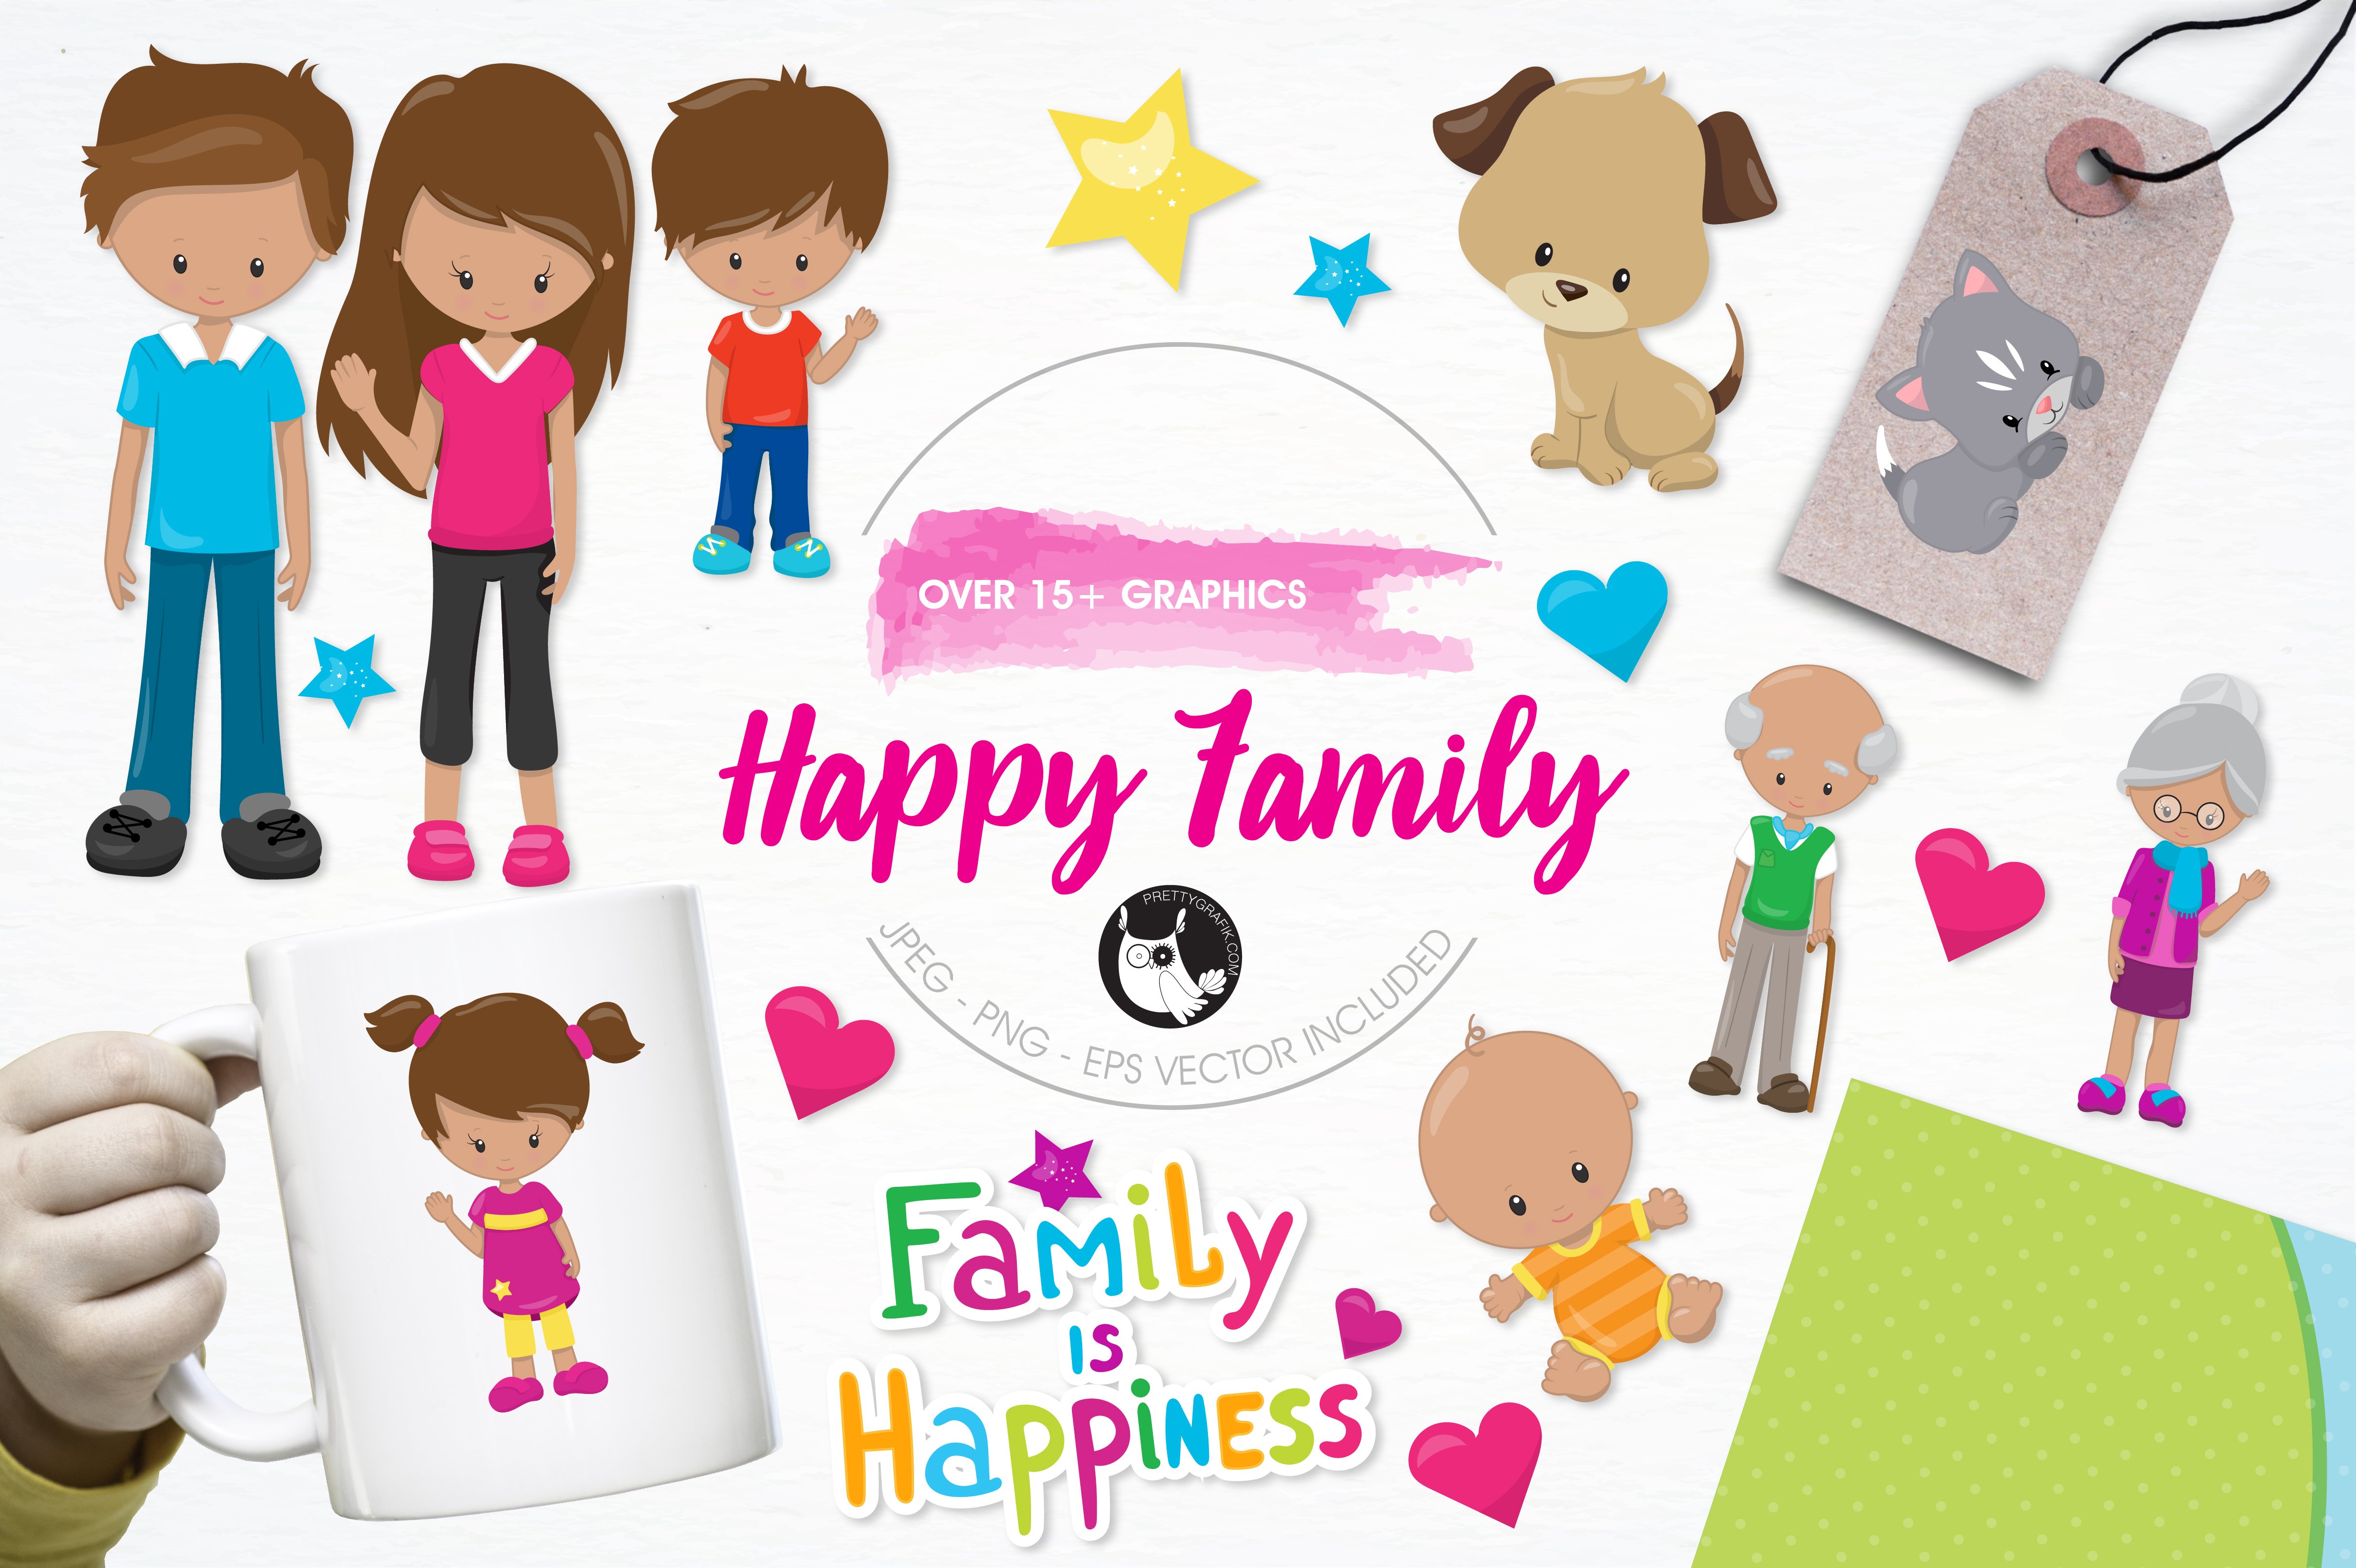 Happy family illustration pack - Vector Image